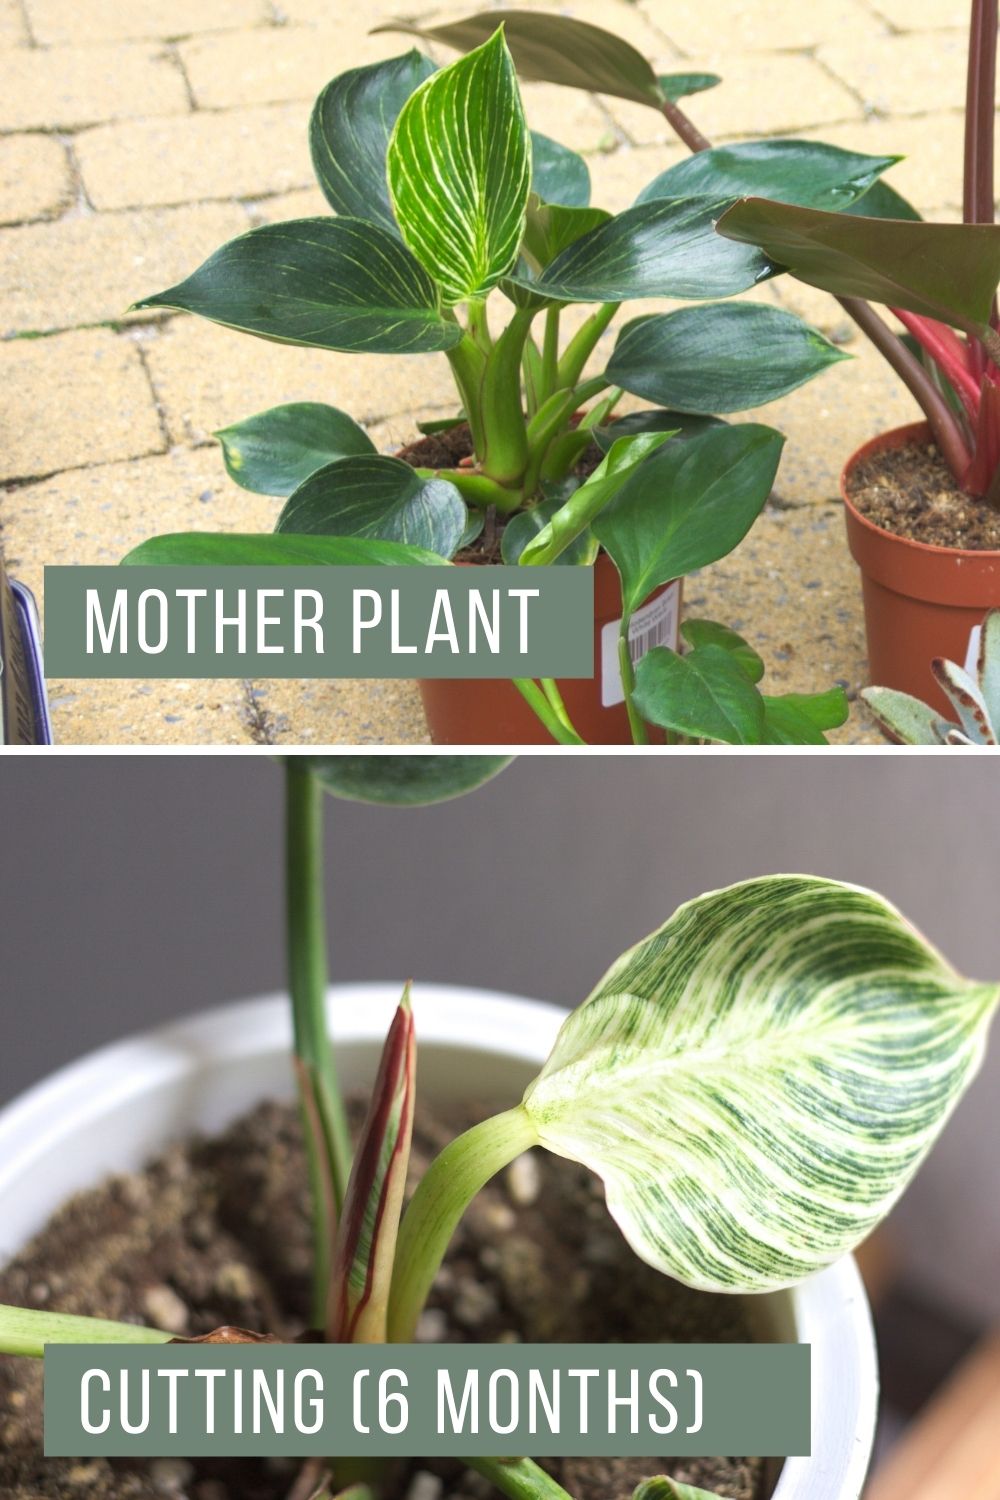 Philodendron 'Birkin' mother plant and cutting comparison photo.